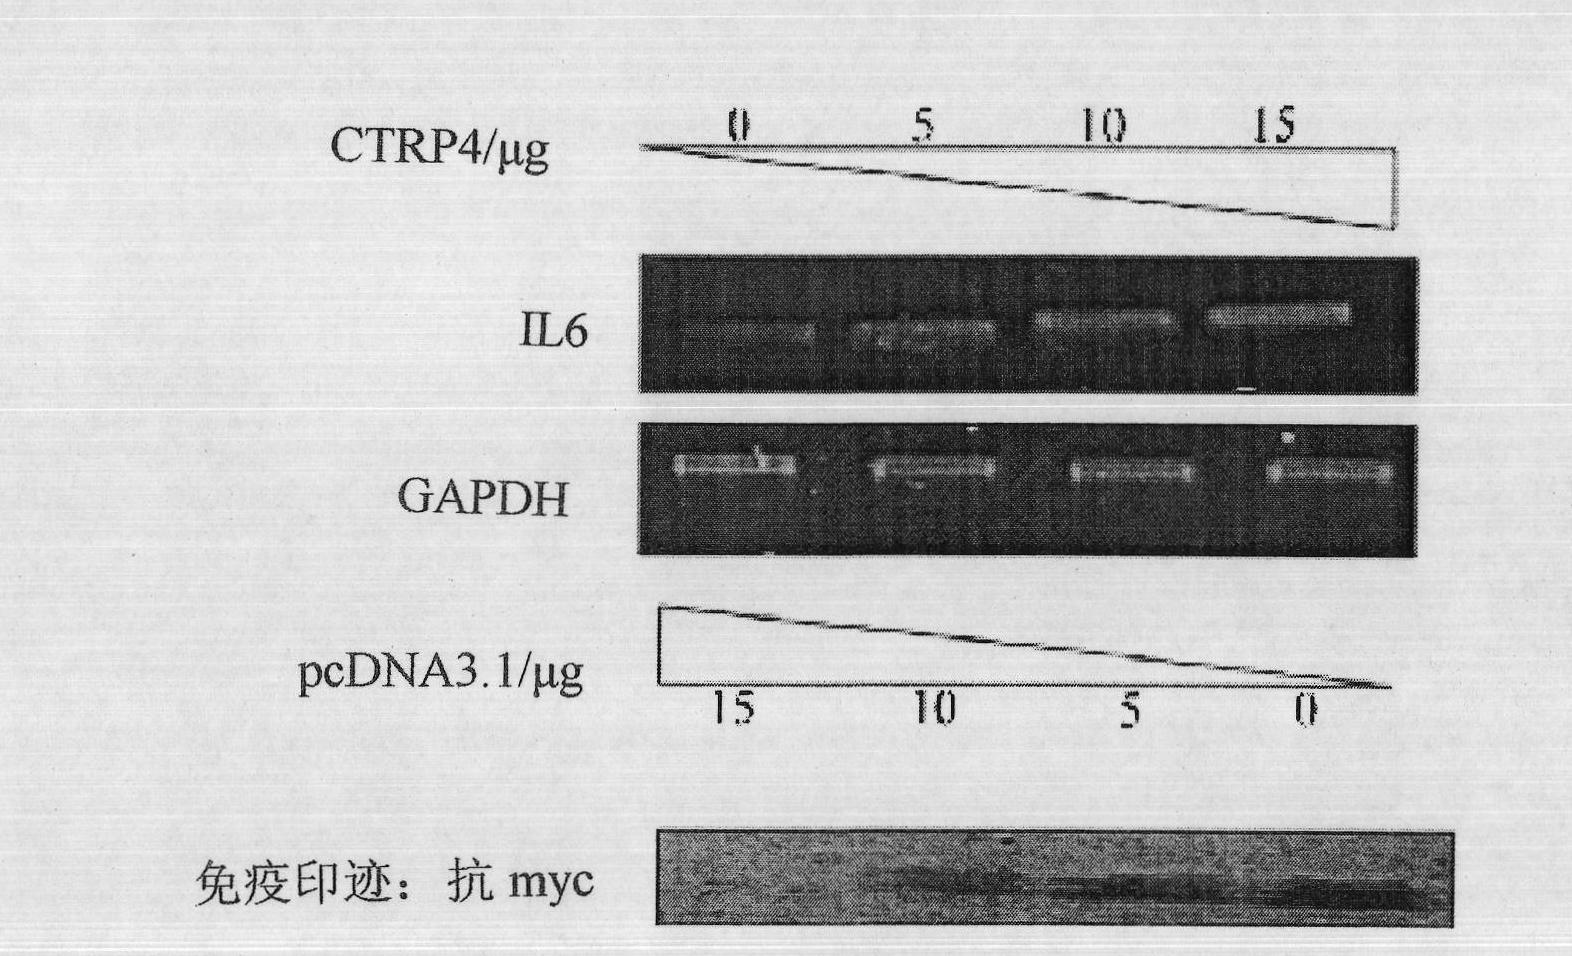 Human CTRP4 gene, its coding protein and their application